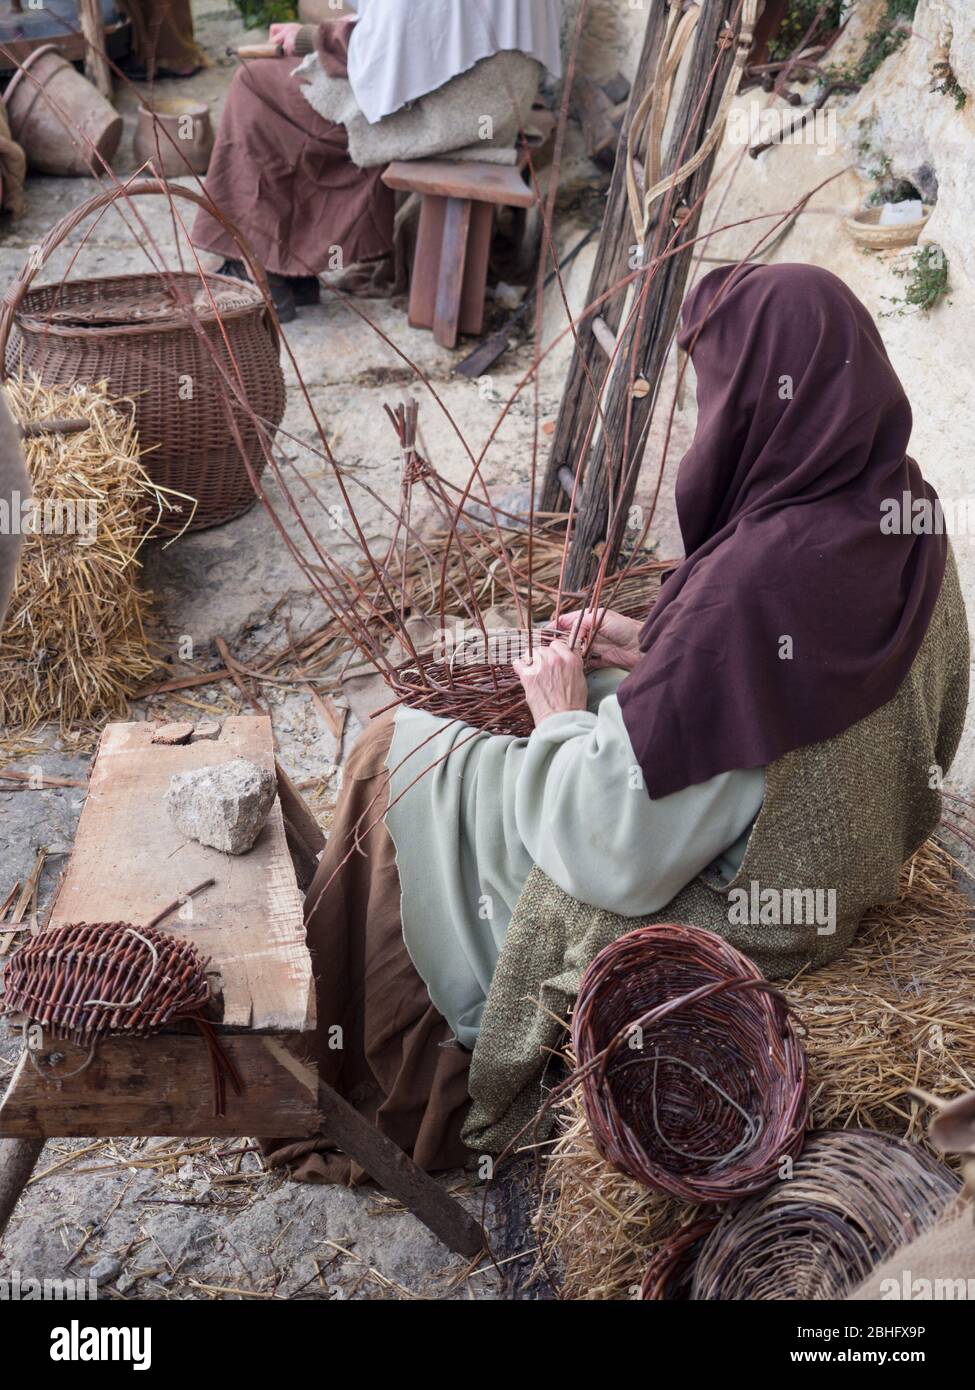 Woman weaves baskets by hand in a rural area market. Stock Photo